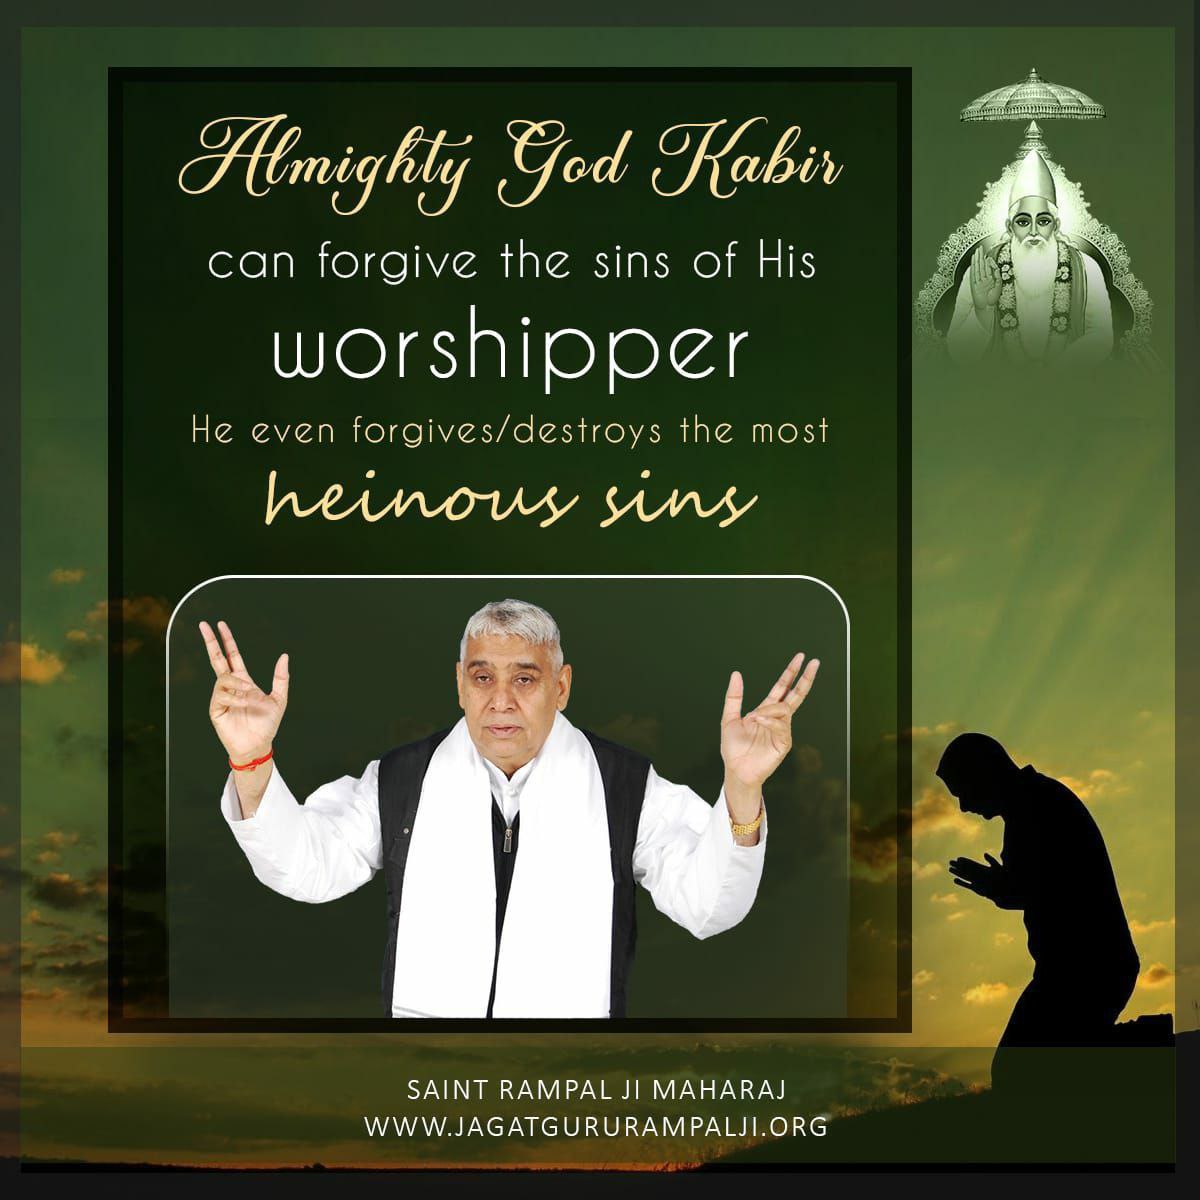 #GodMorningFriday 
Almighty God Kabir can forgive the sins of his worshipper he even forgive/destroys the most heinous sins.......